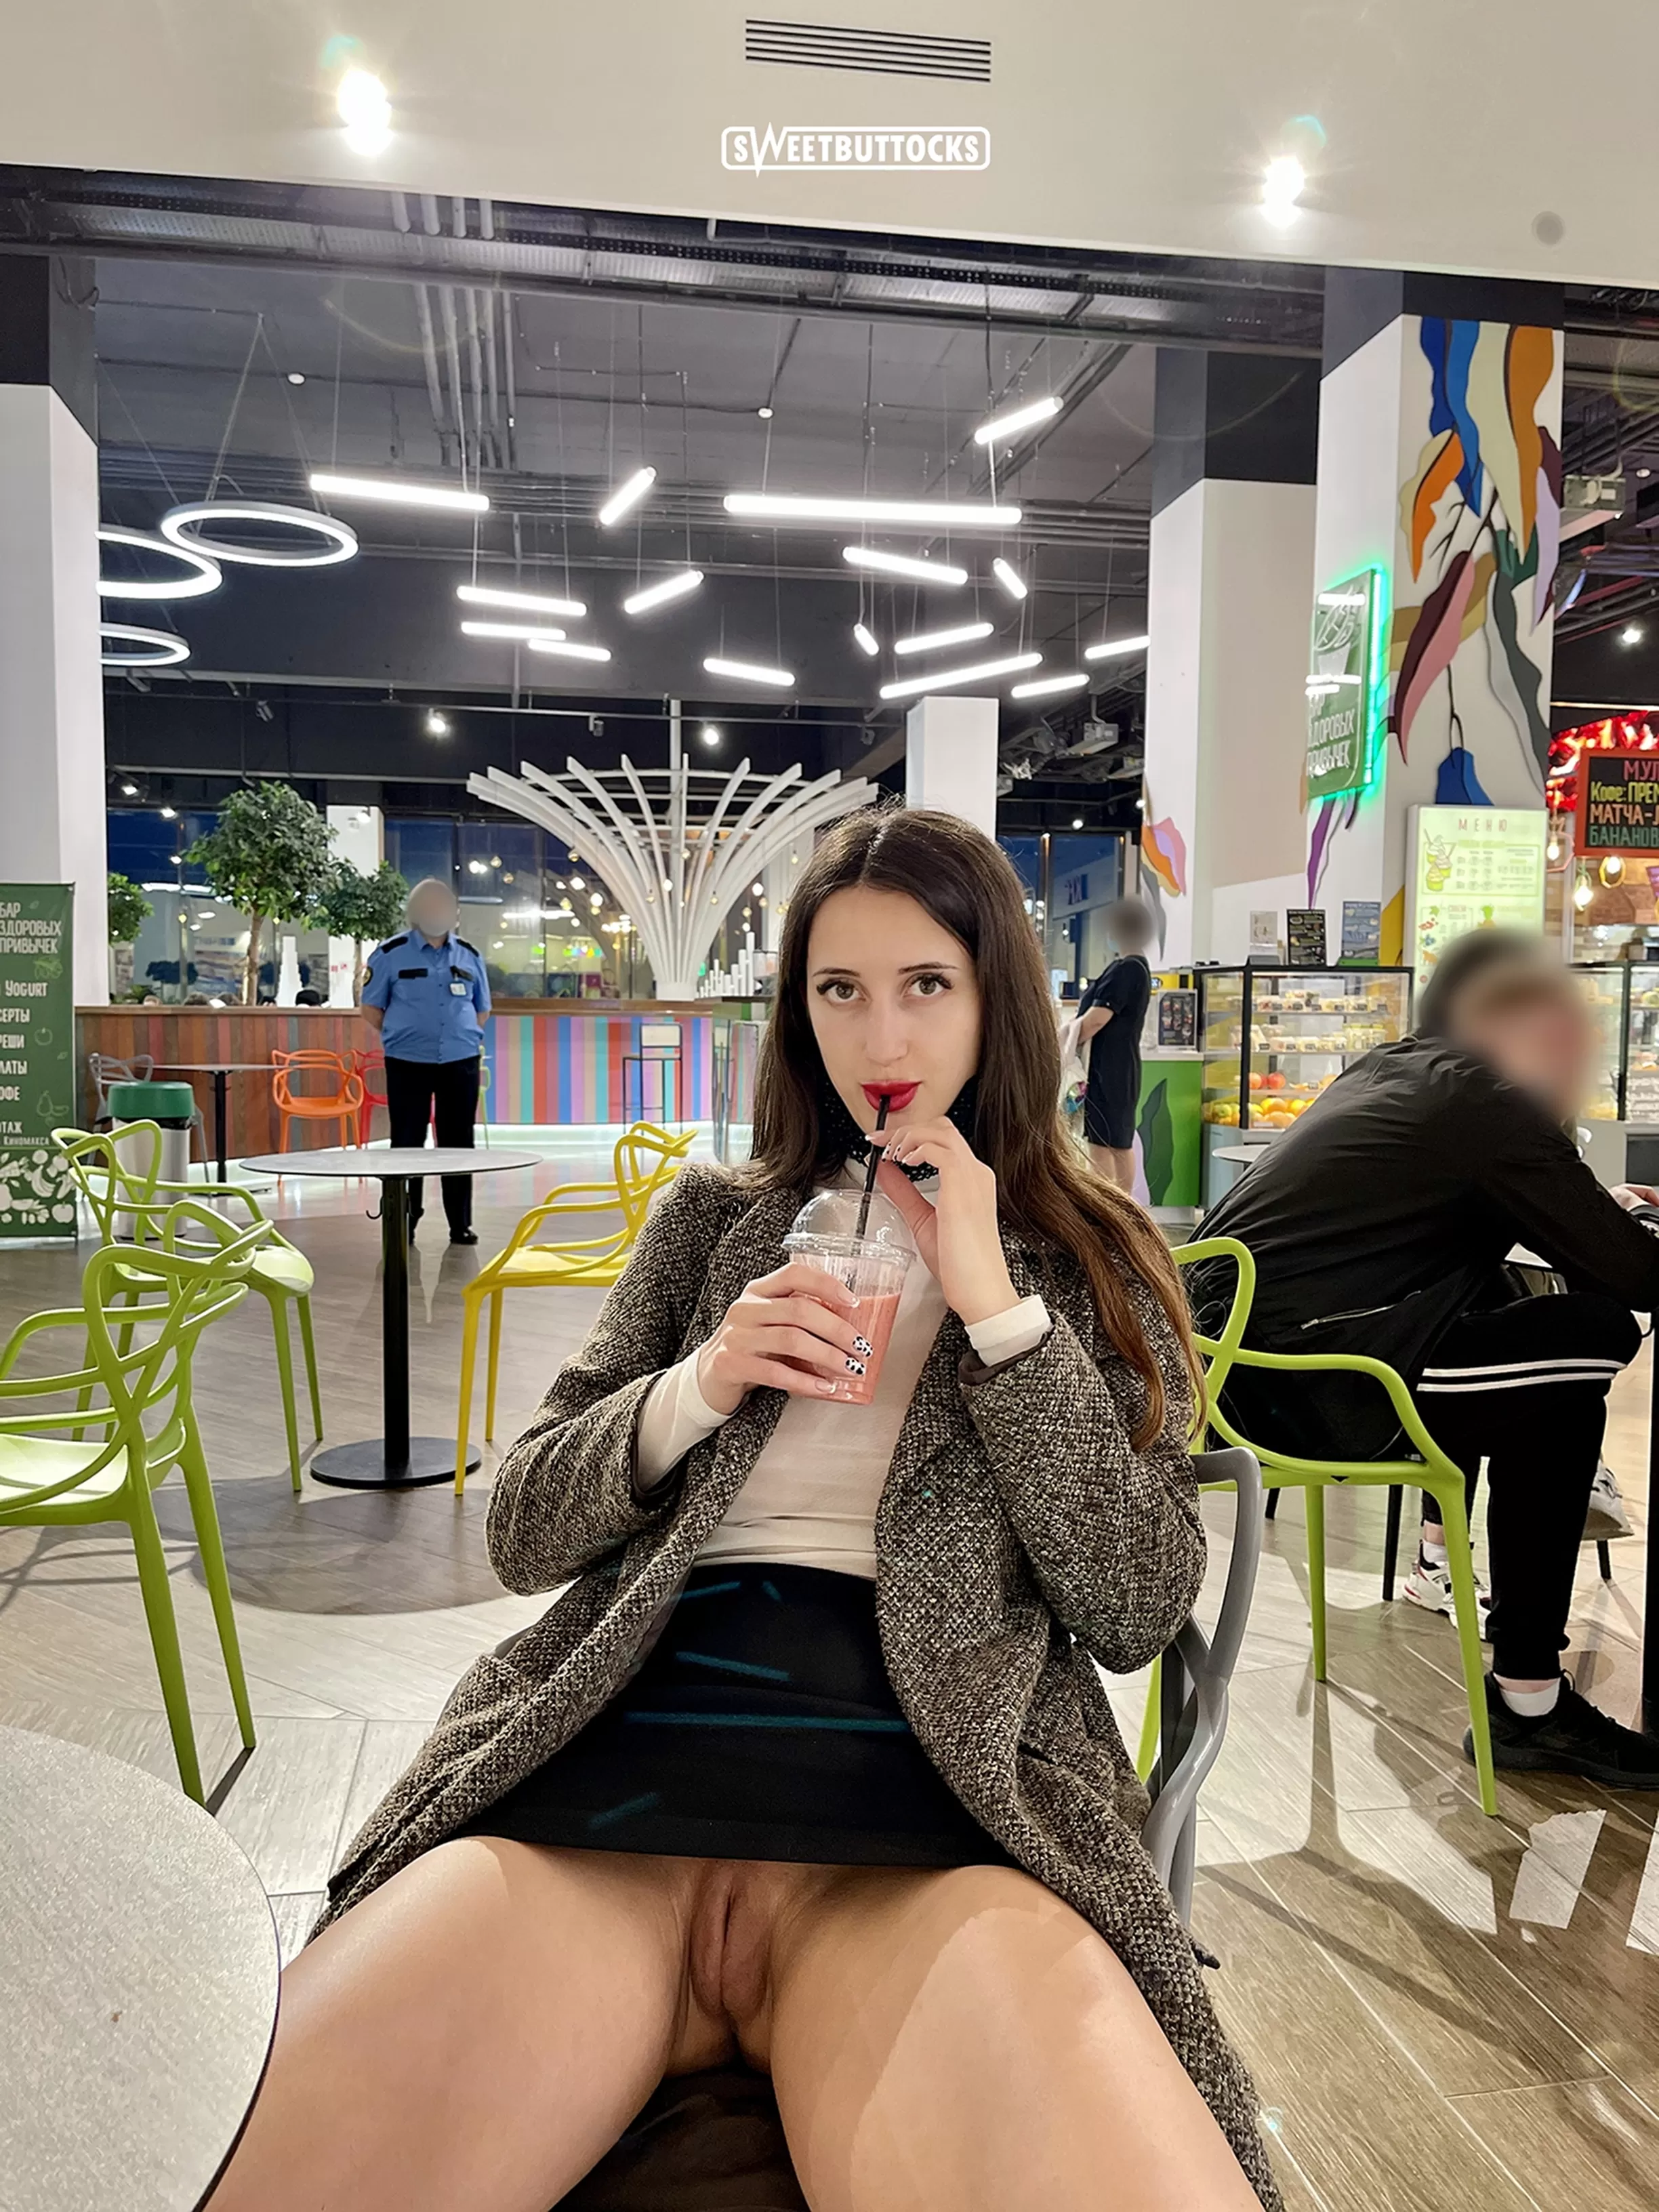 Browse public mall and wet pussy under my pants - FlashingAndFlaunting for ...